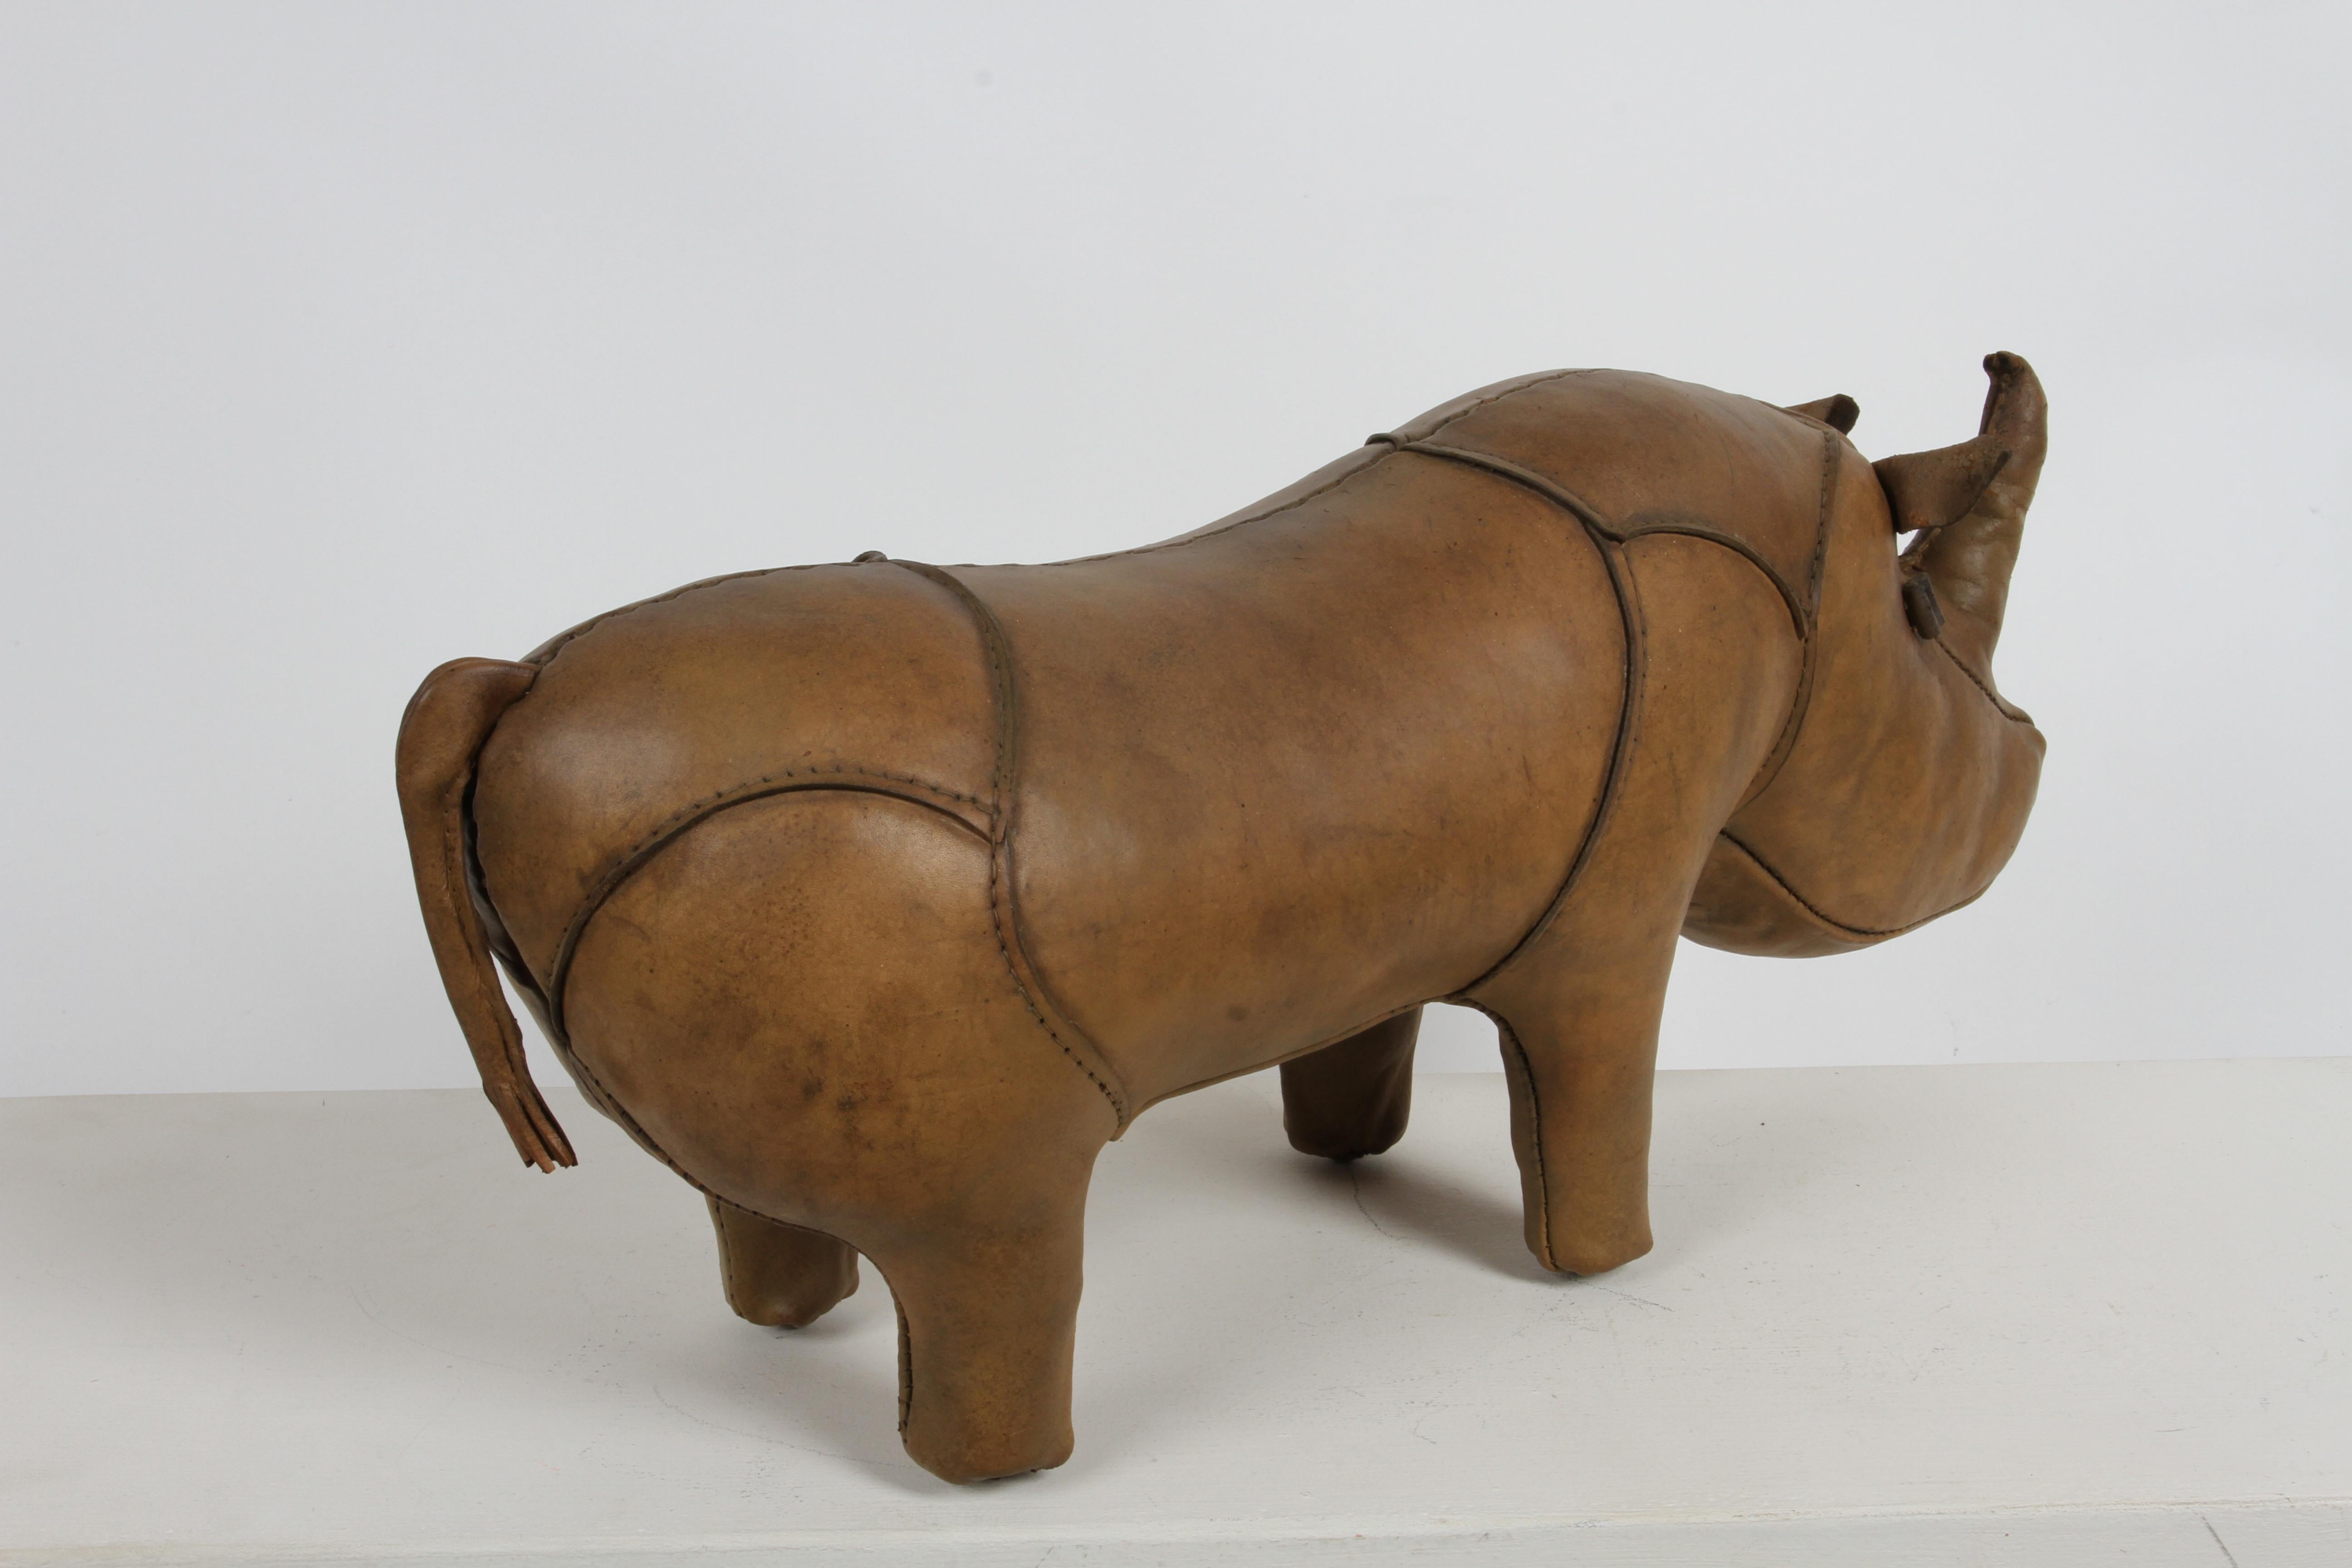 1960s Dimitri Omersa Leather Rhino Retailed by Abercrombie & Fitch - Restored For Sale 3